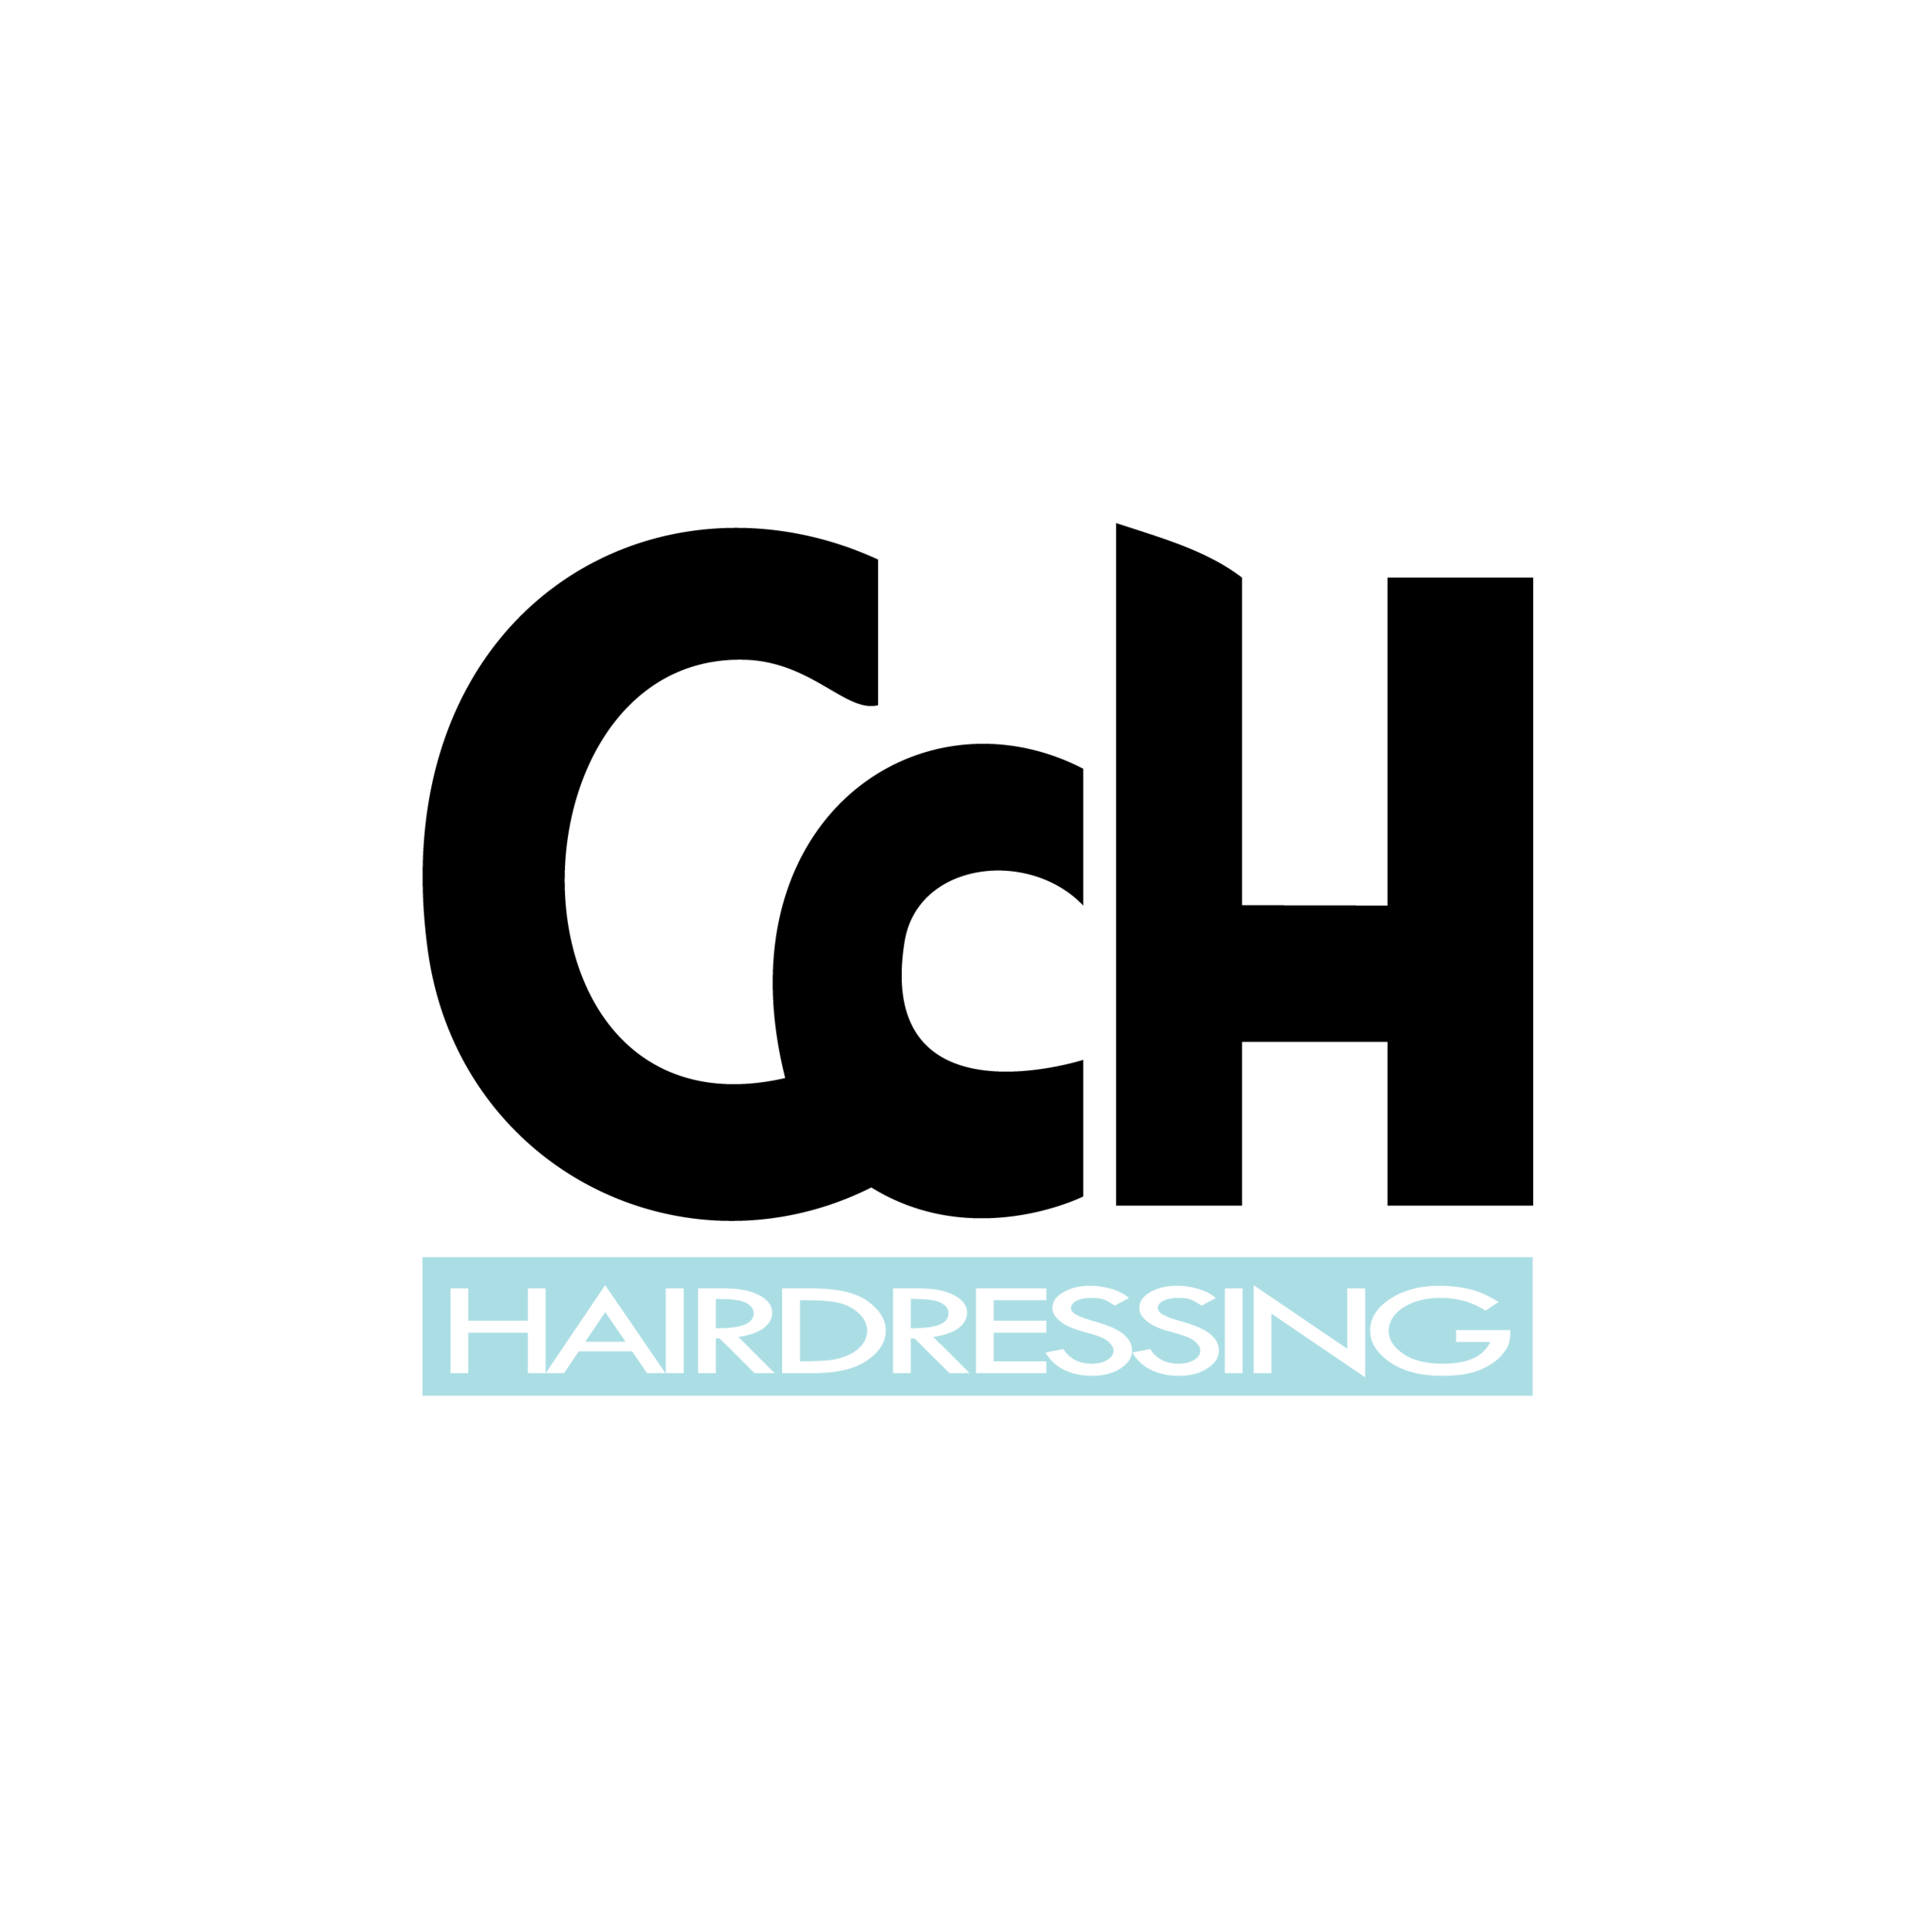 CcH hairdressing logo-08.png